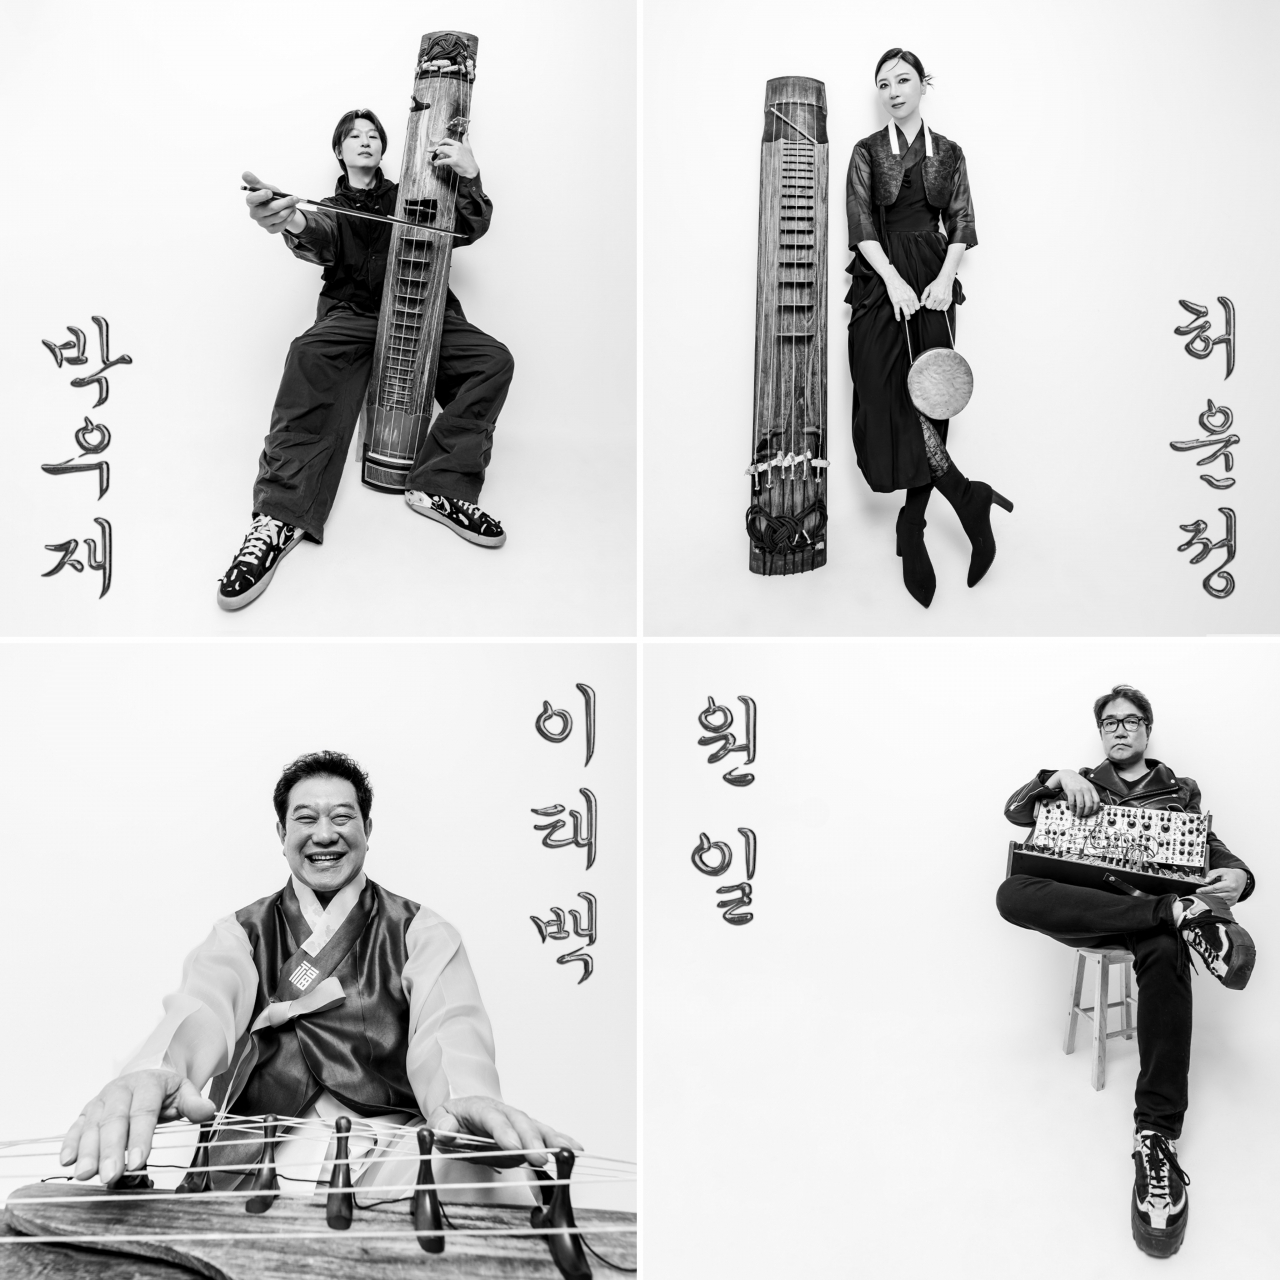 Clockwise from top left, geomungo player Park Woo-jae and Heo Yoon-jeong, composer Won Il and ajaeng player Lee Tae-baek (NTOK)